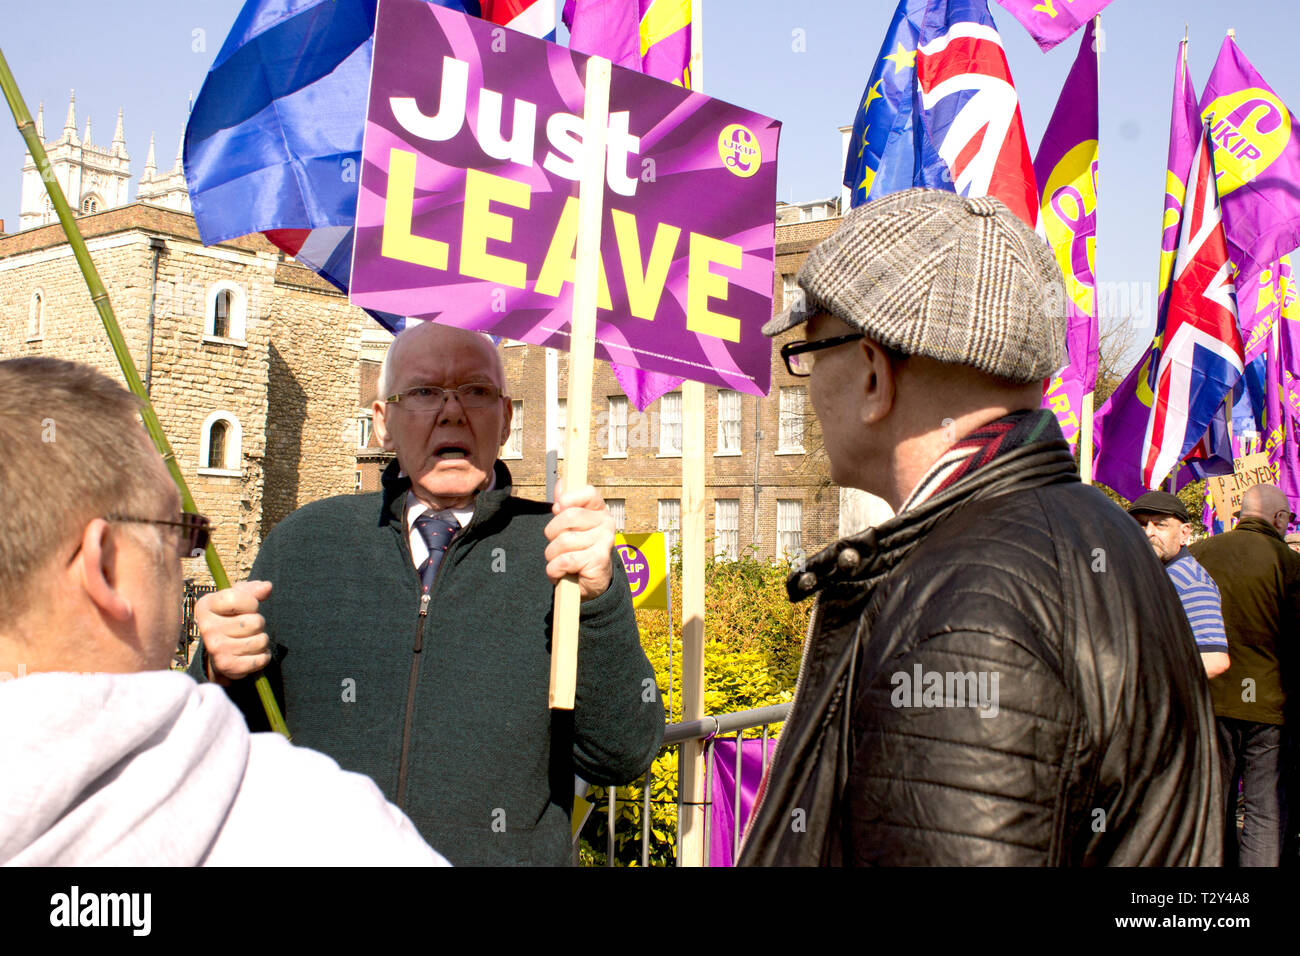 Man holding a pro Brexit poster in a public demonstration in London Stock Photo